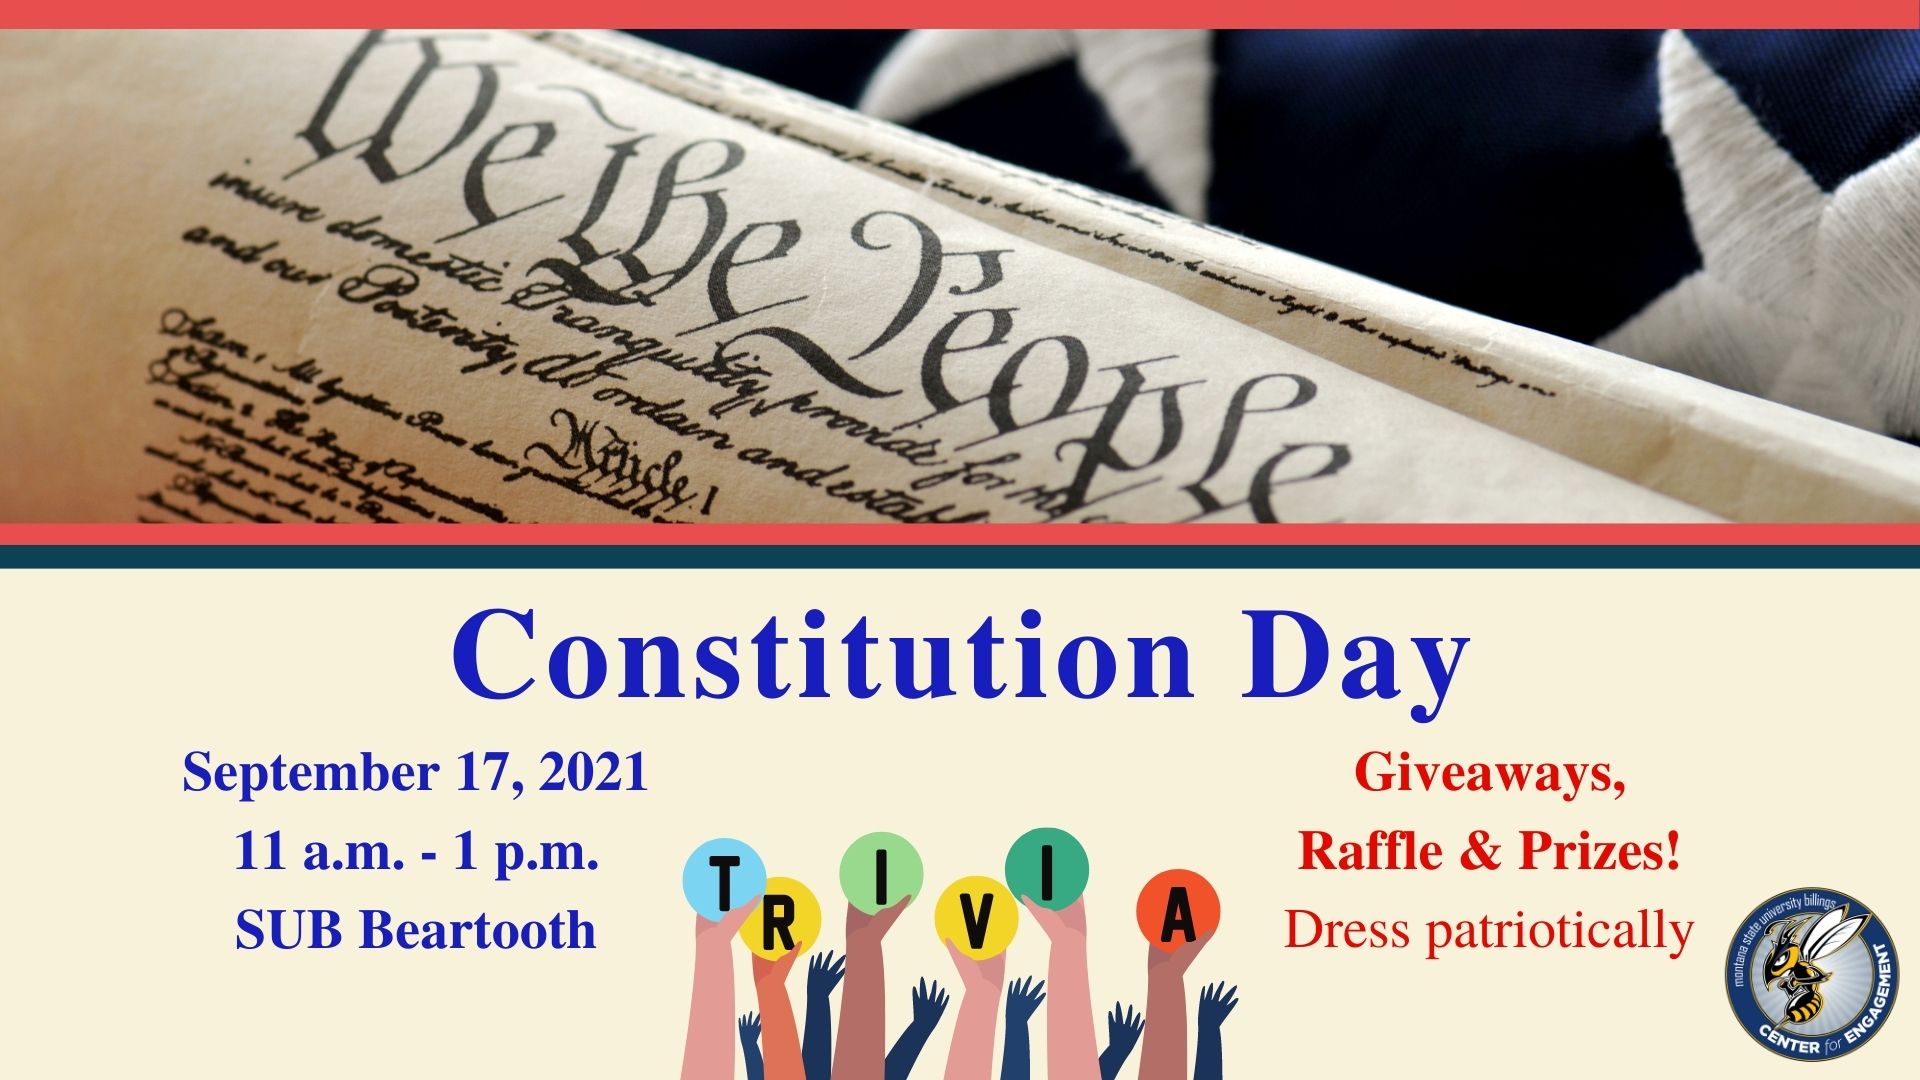 Constitution Day Trivia. September 17, 2021 11 am to 1 pm SUB Beartooth. Giveaways, Raffle, and Prizes. Dress patriotically.